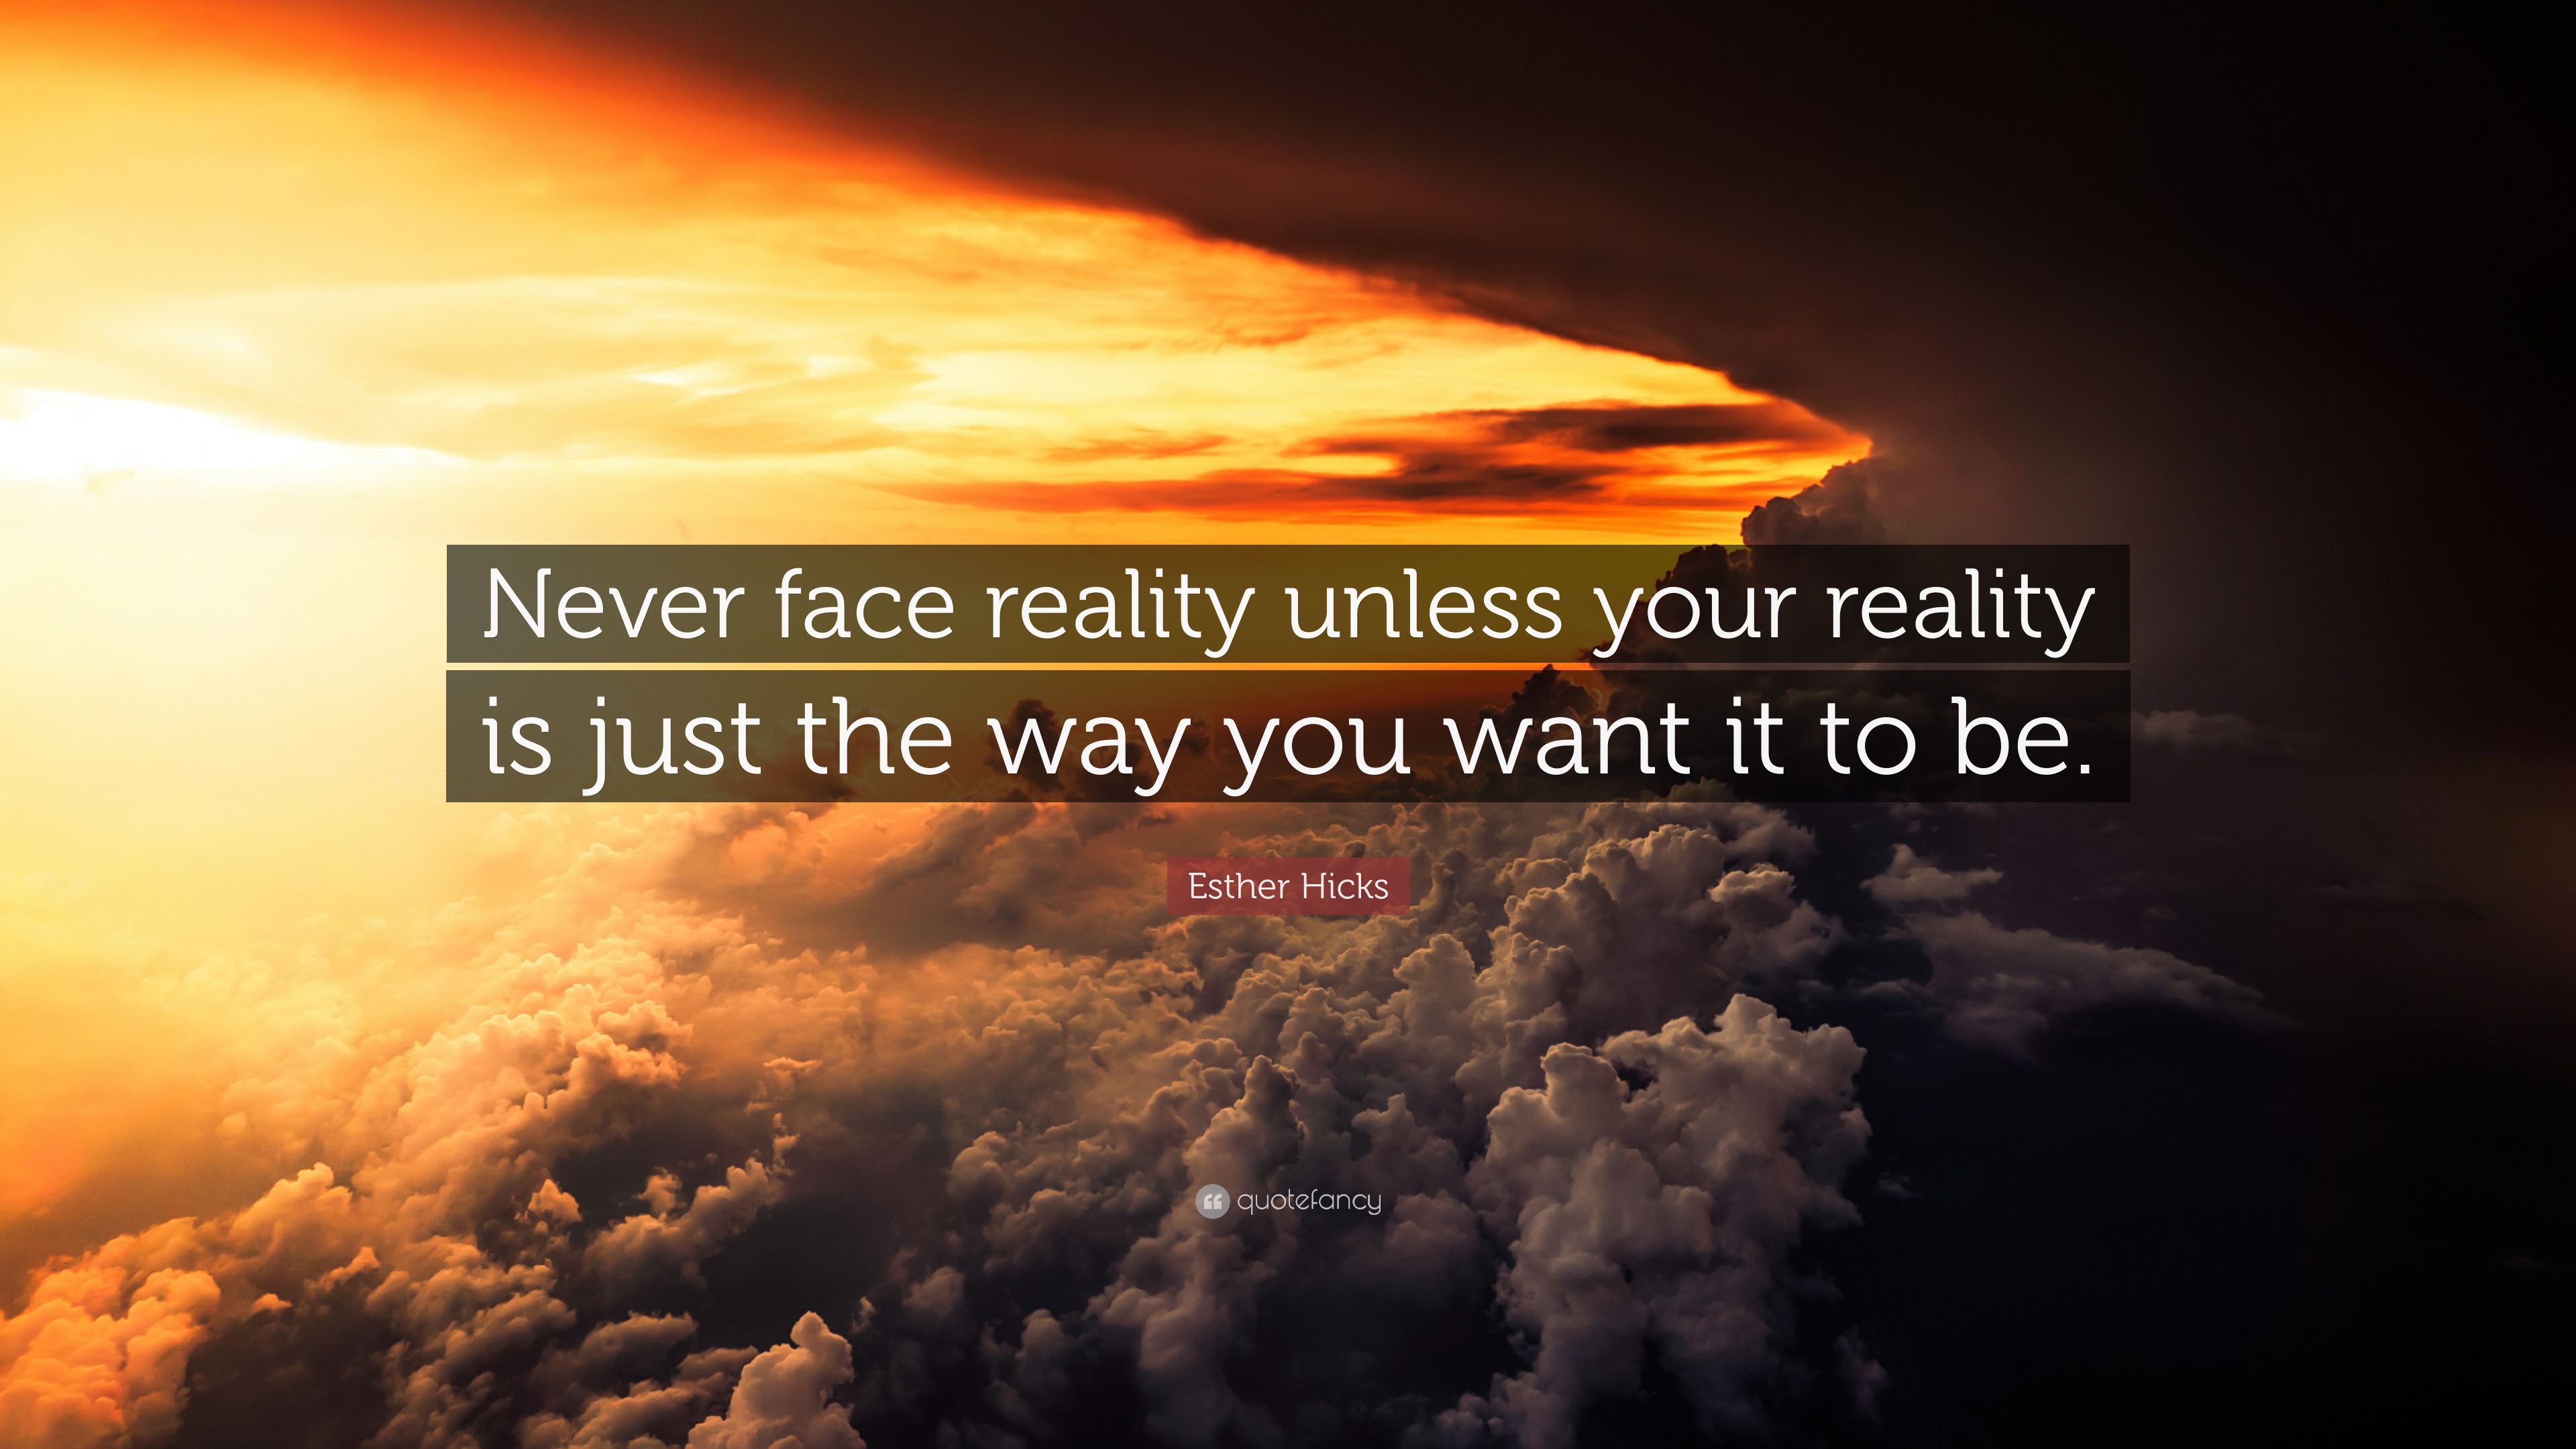 Esther Hicks Quote “never Face Reality Unless Your Reality Is Just The